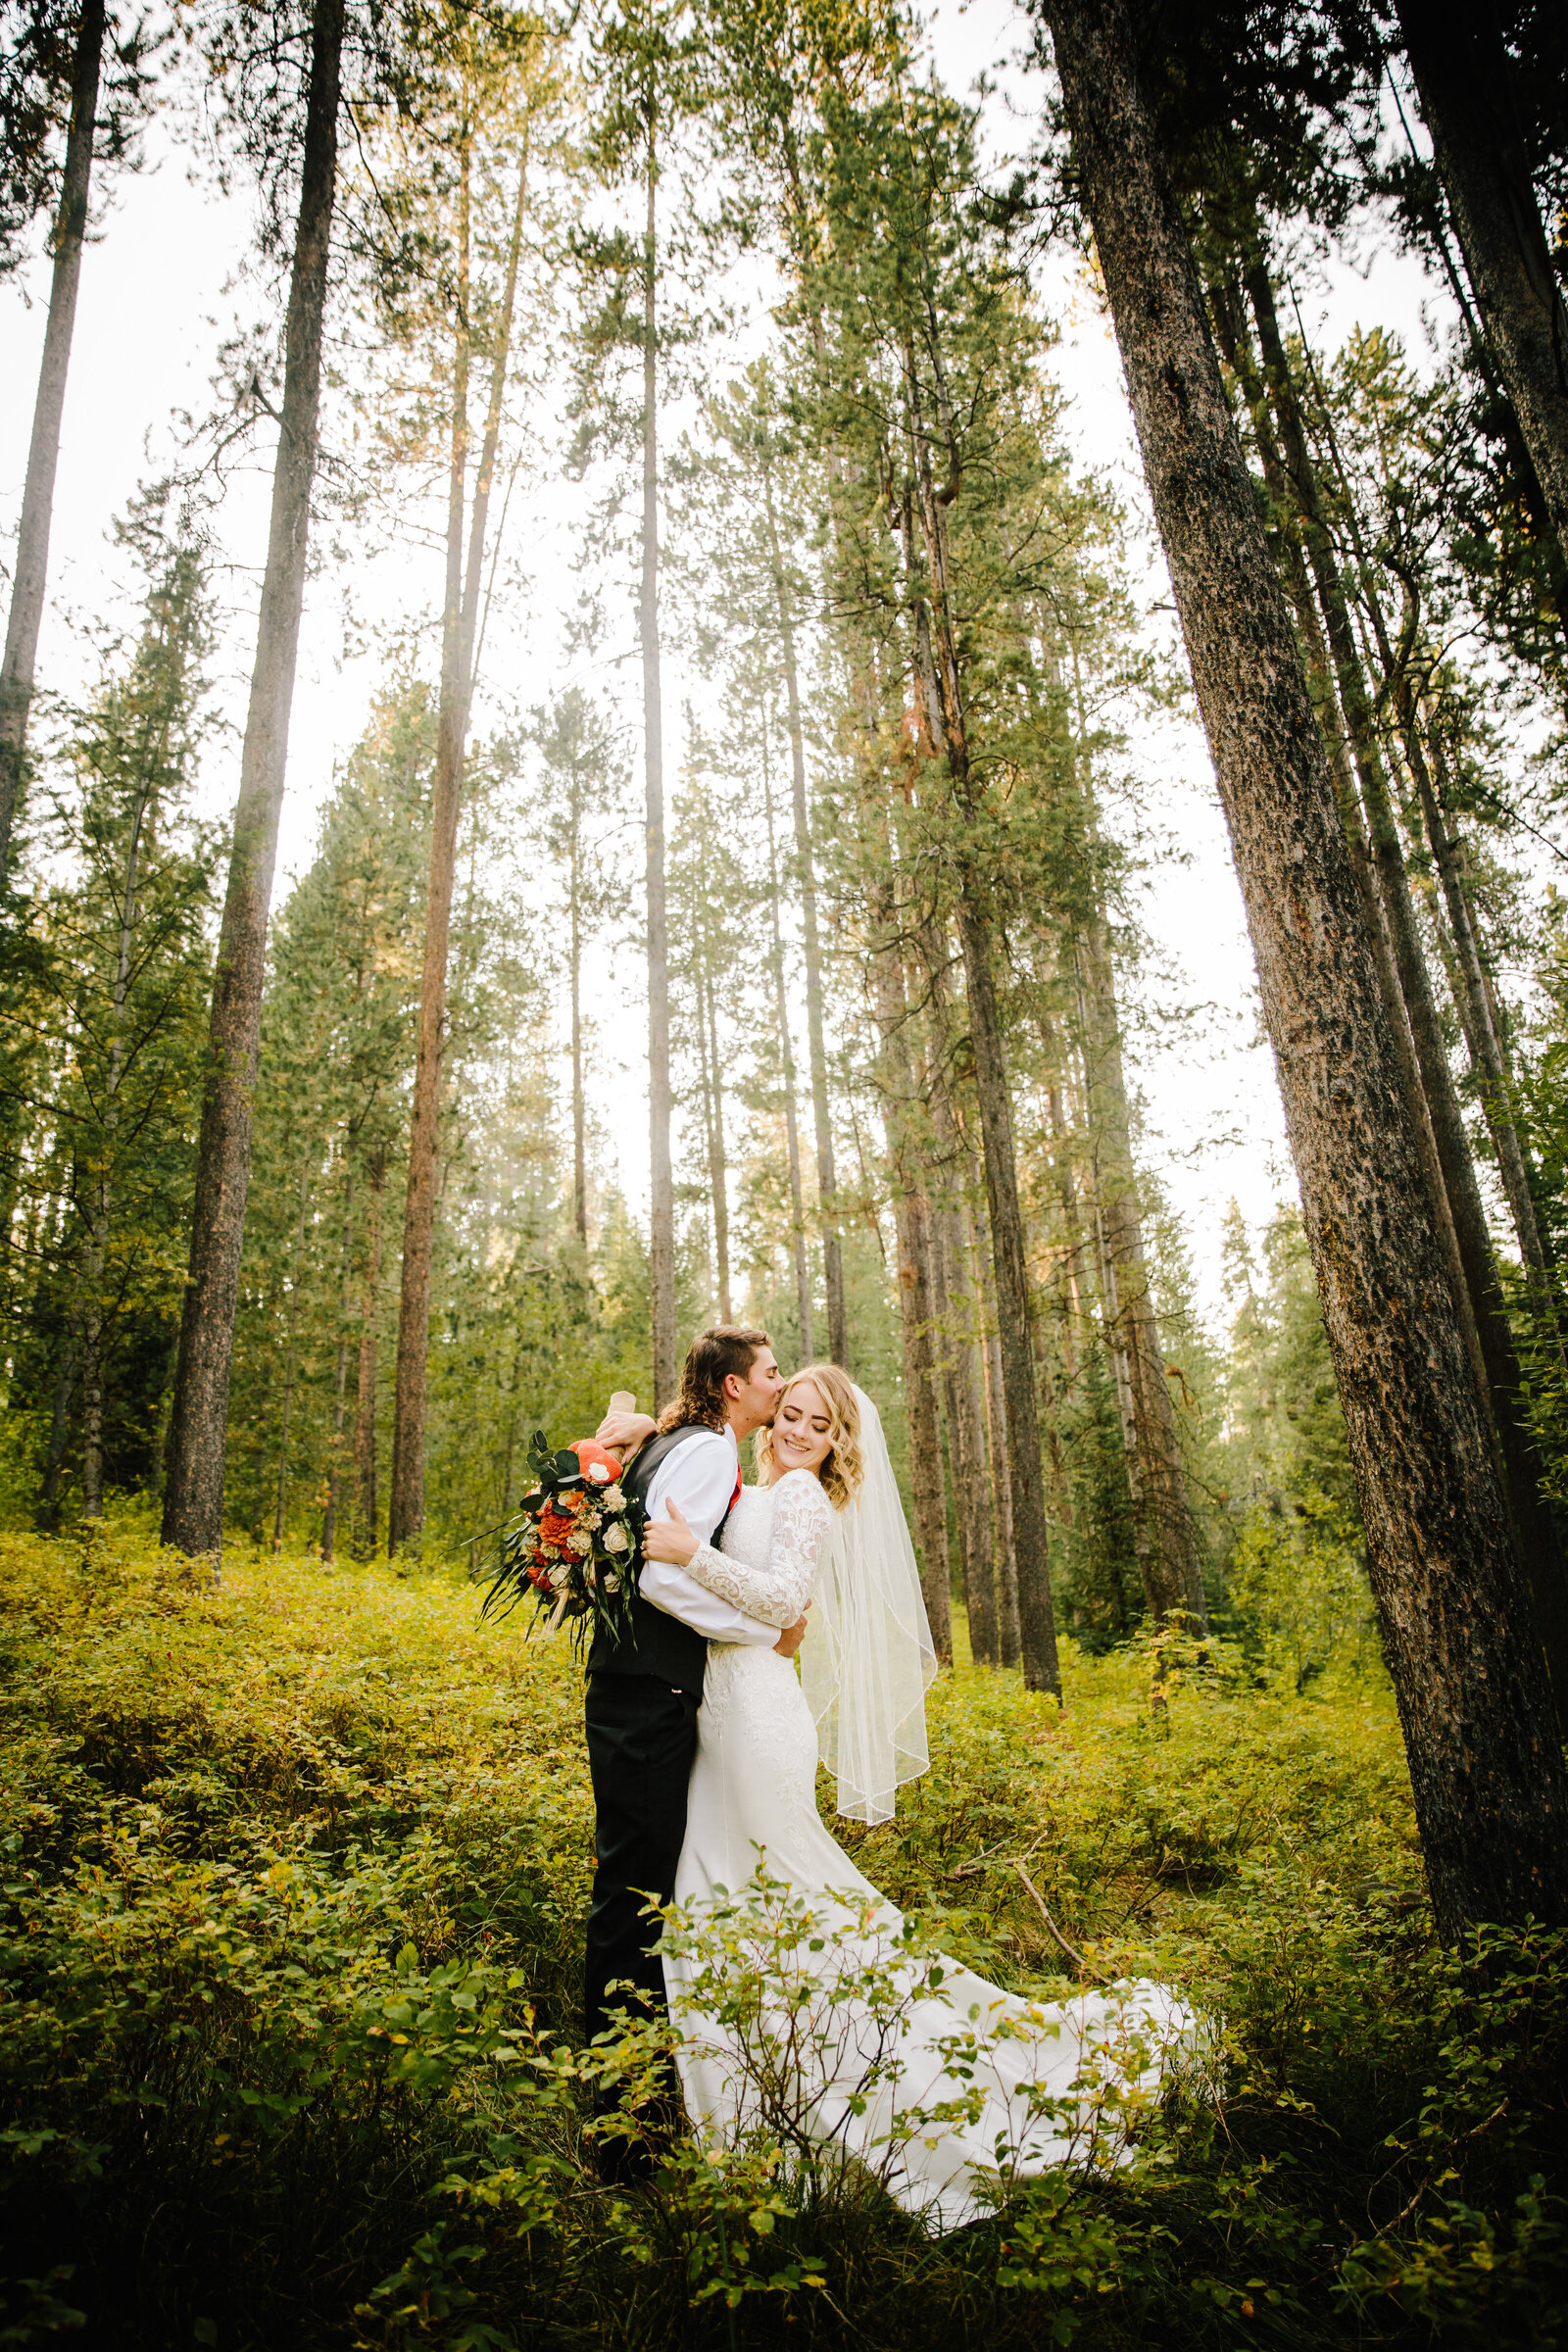 Jackson Hole photographers capture couple in forest during golden hour portraits